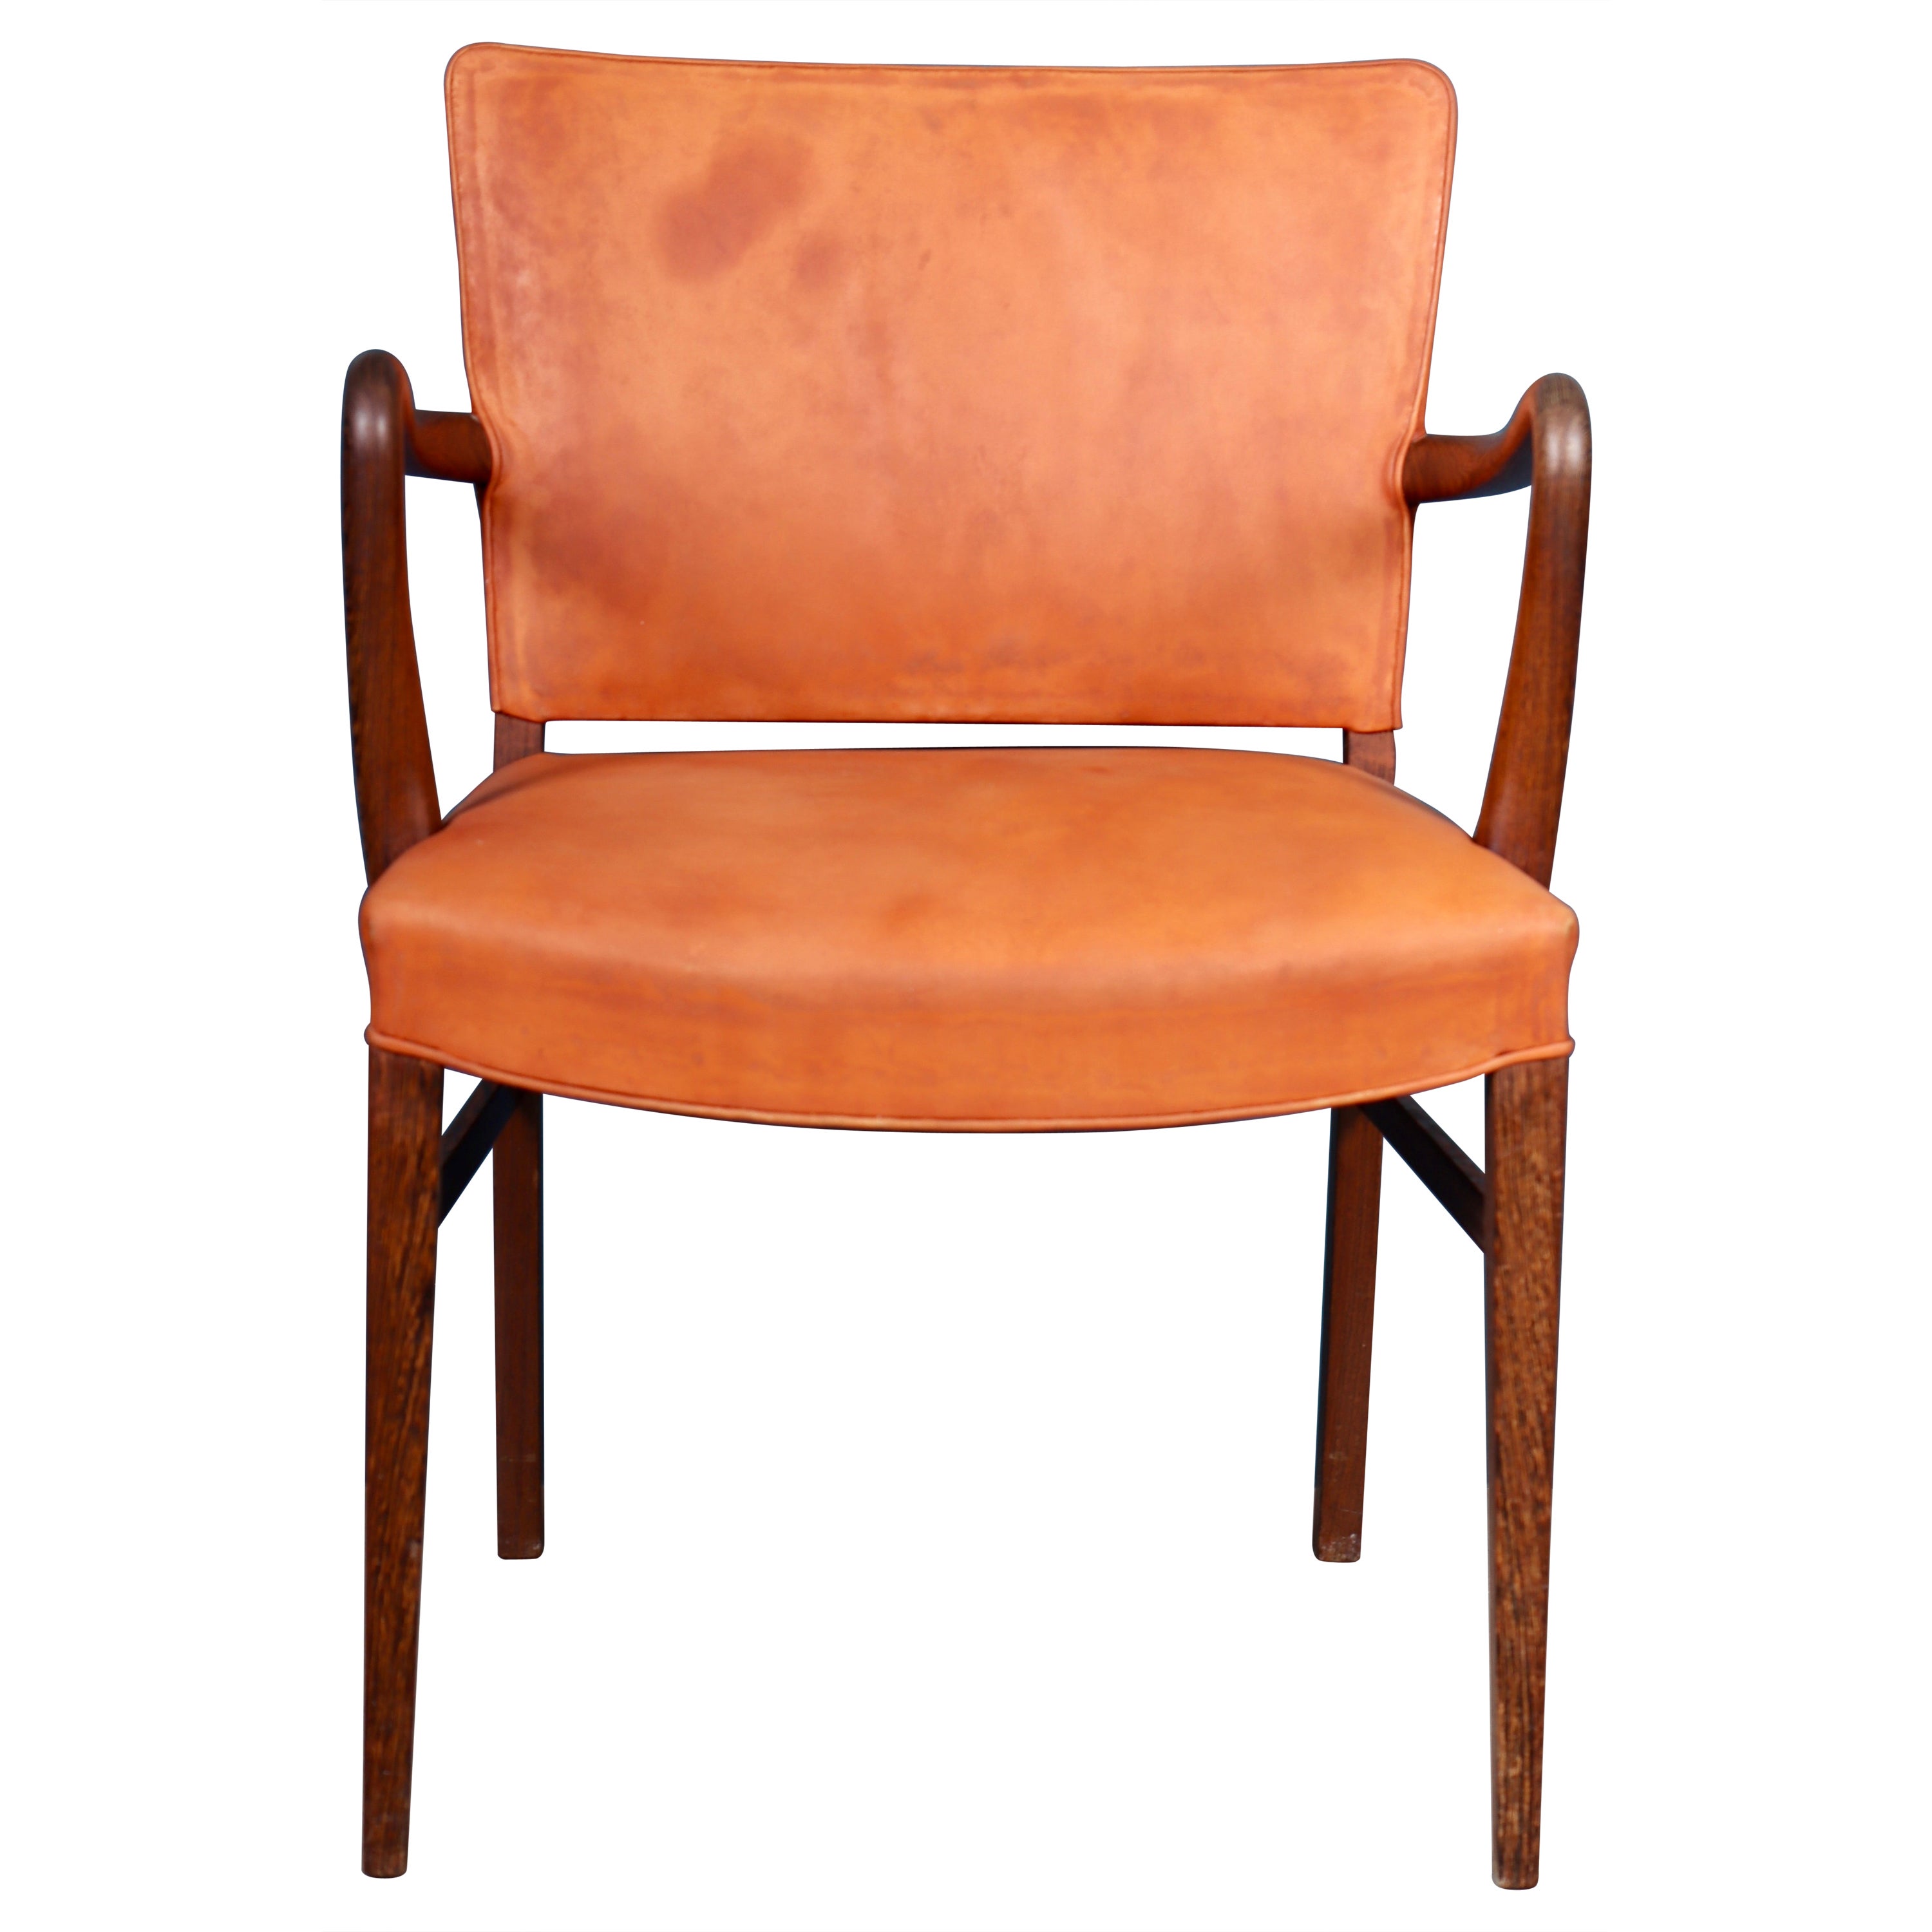 Rare Midcentury Armchair in Patinated Leather and Wenge, Danish Design, 1950s